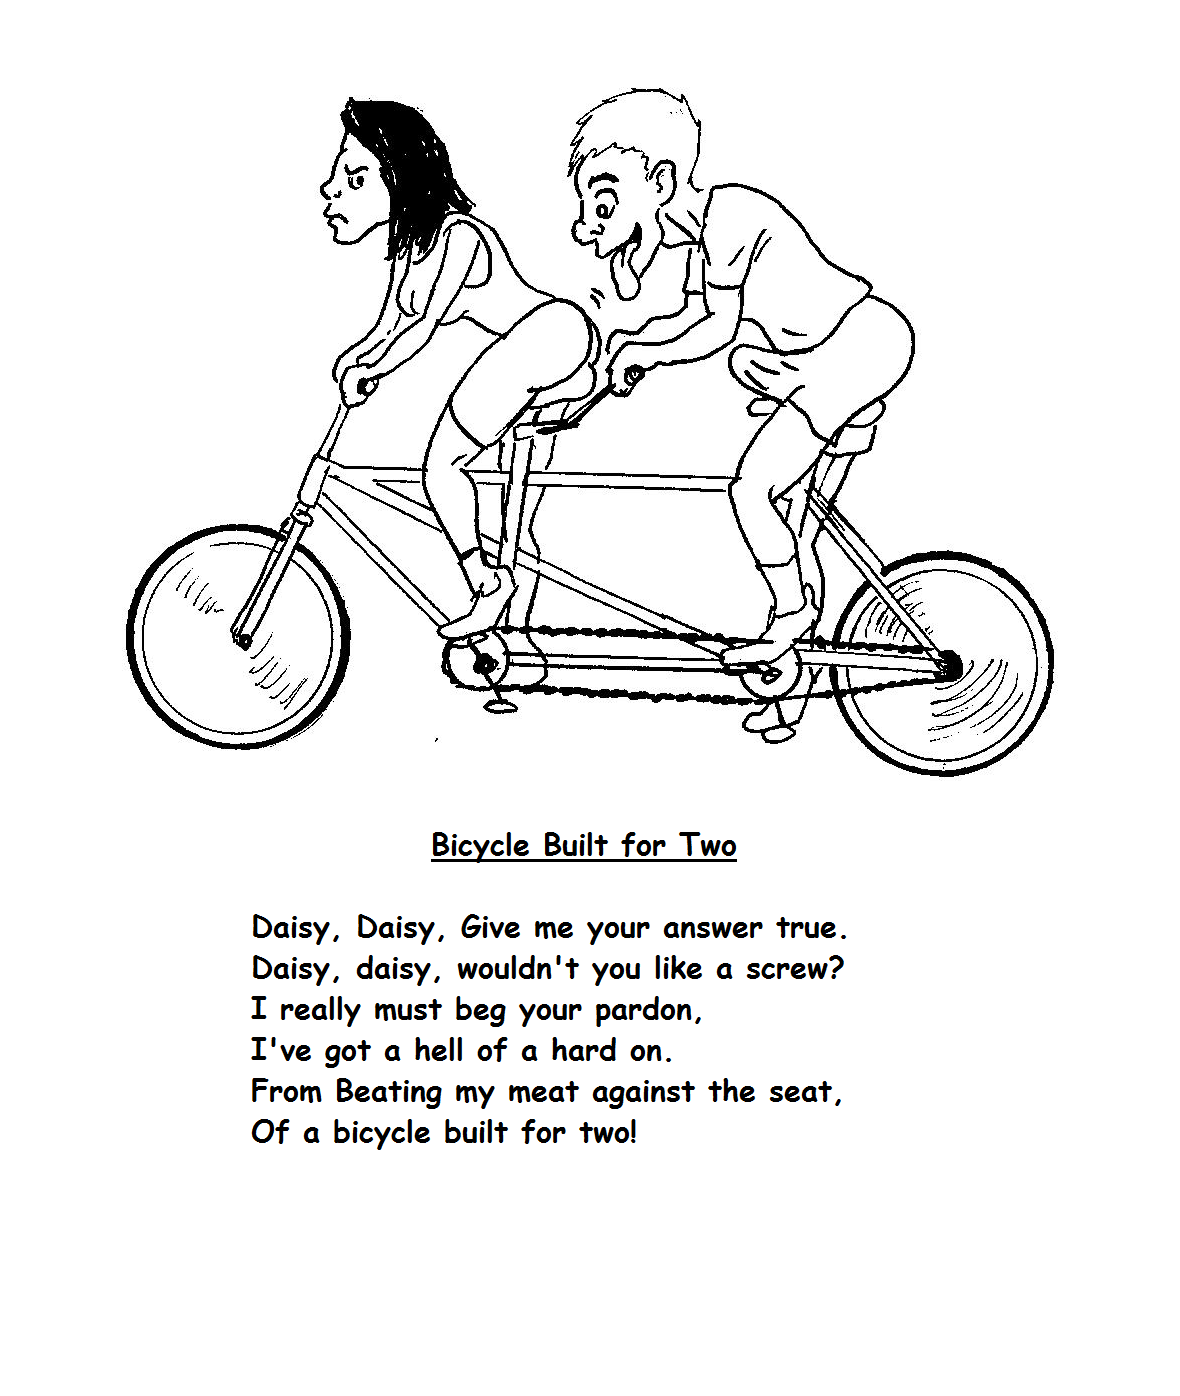 A Bicycle Built for Two